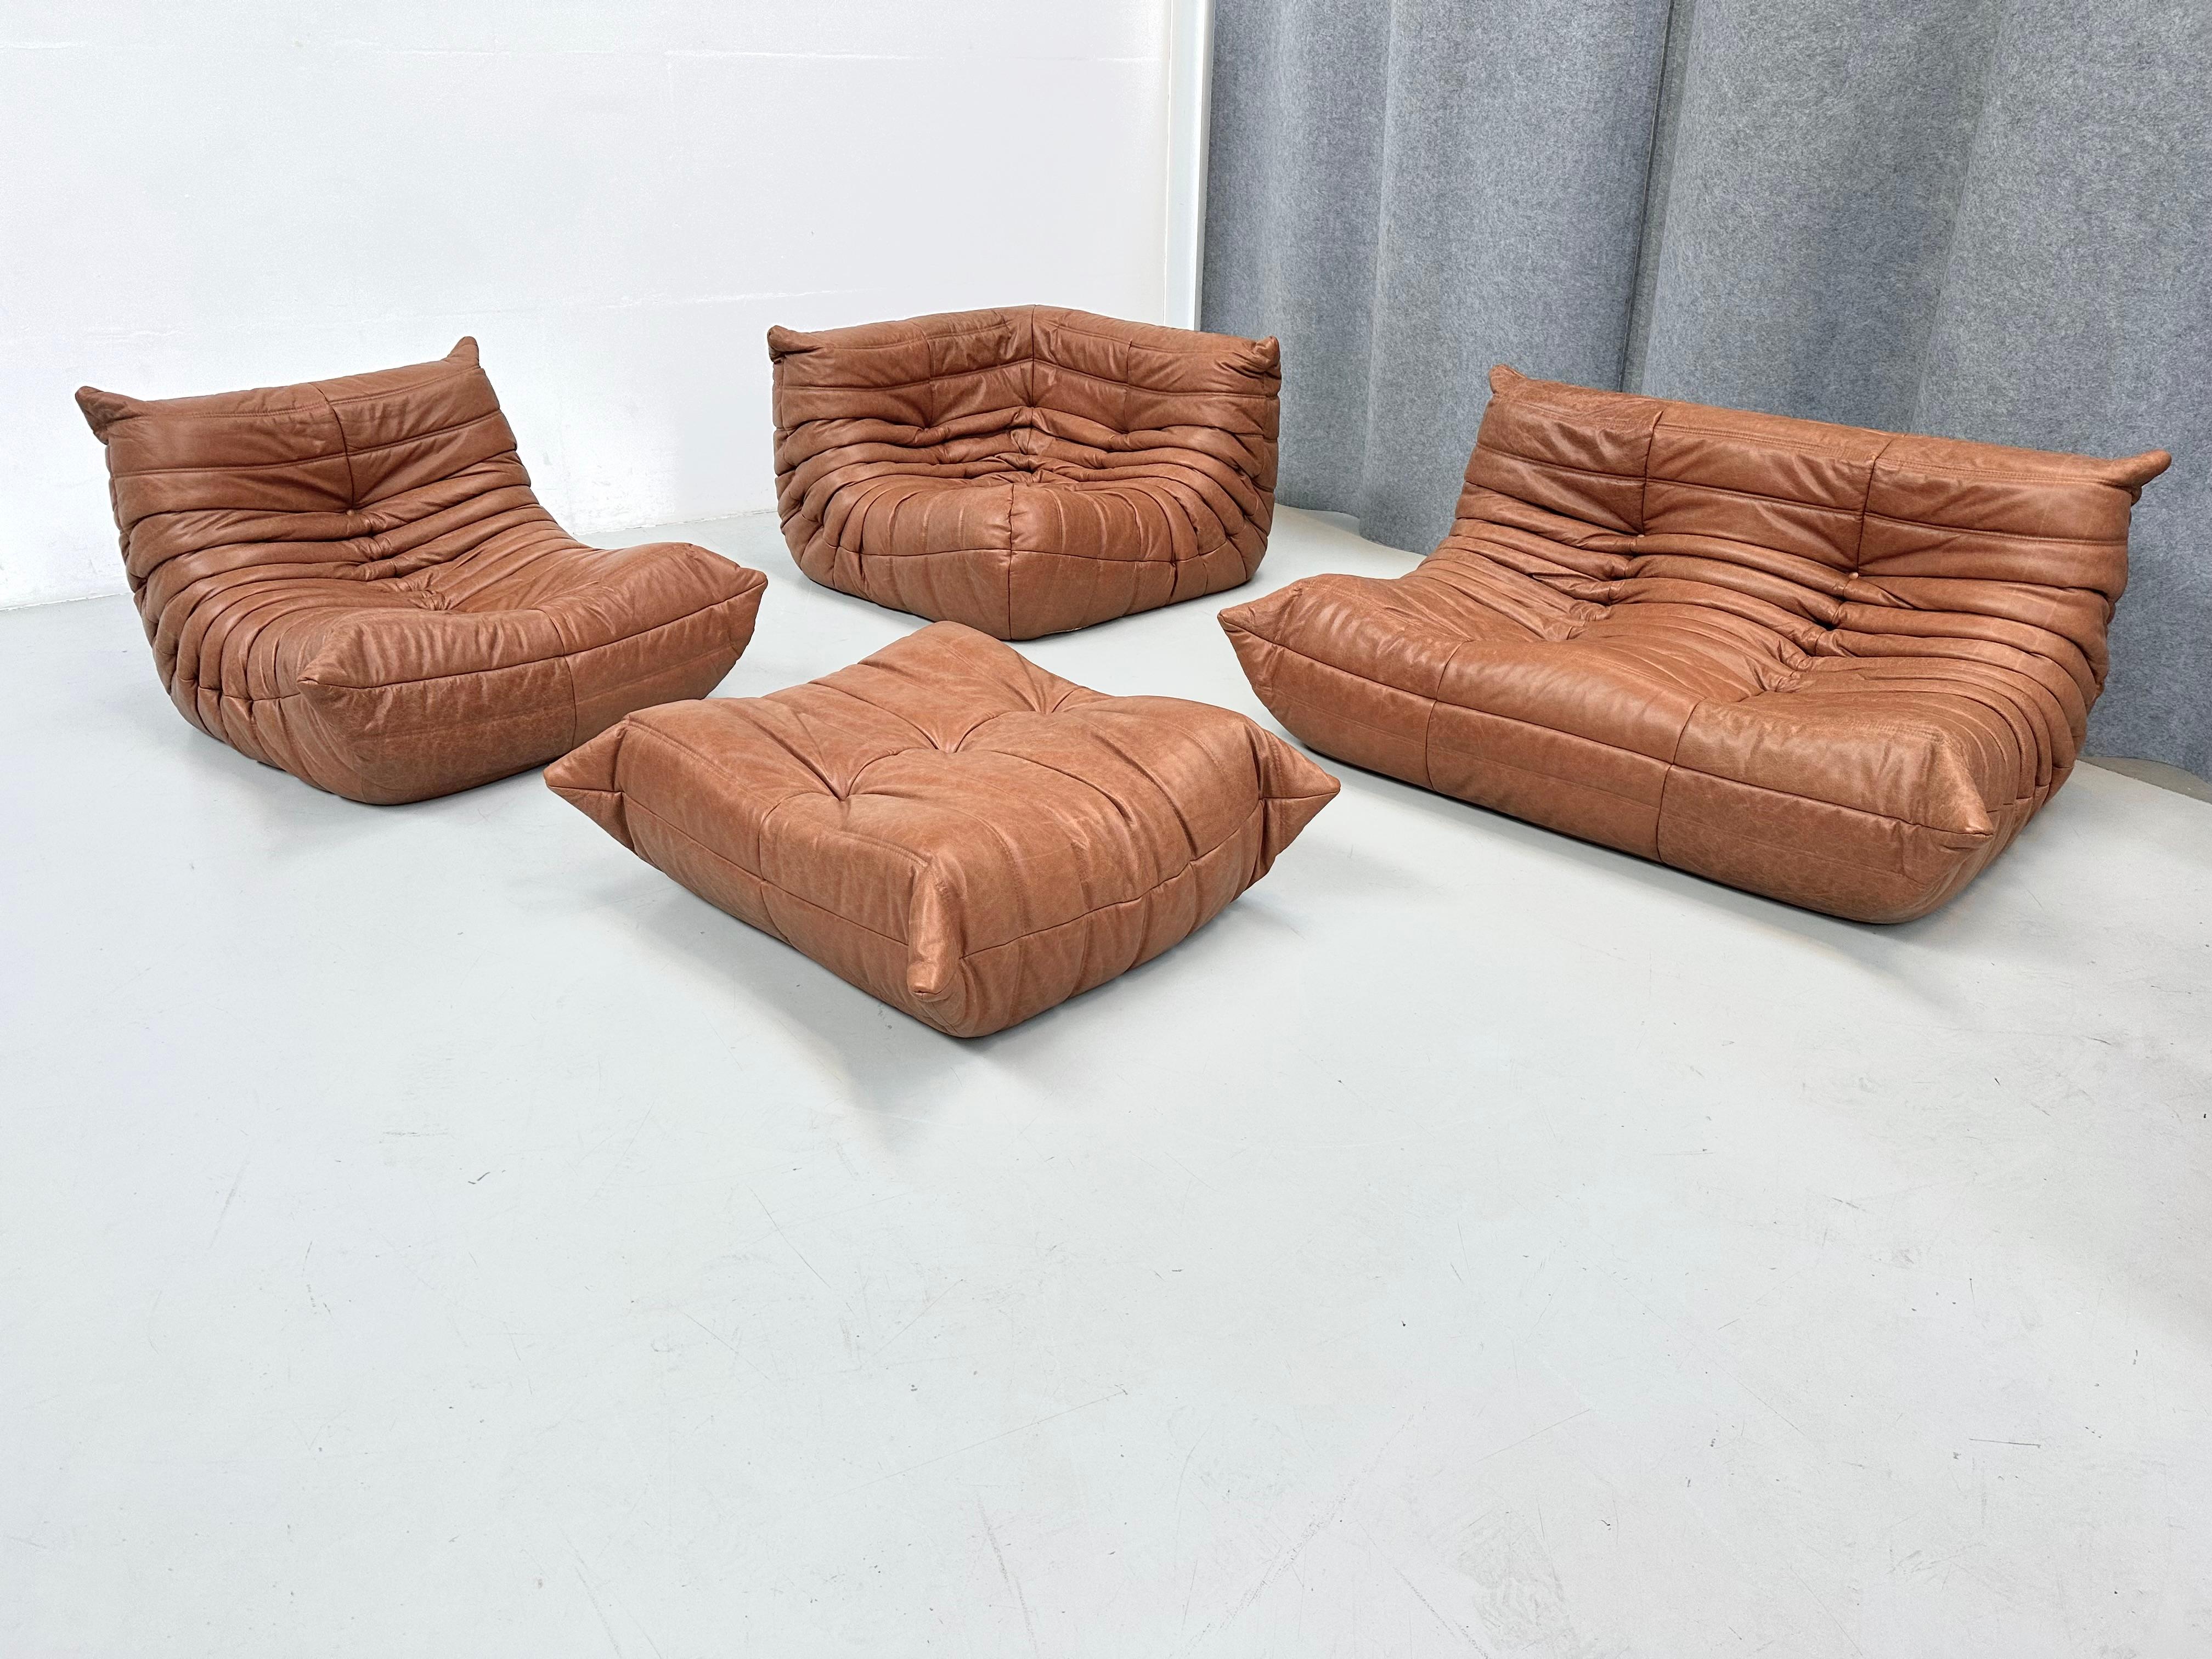 French Cognac Leather Togo Livingroomset  by Michel Ducaroy for Ligne Roset. In Excellent Condition For Sale In Eindhoven, Noord Brabant